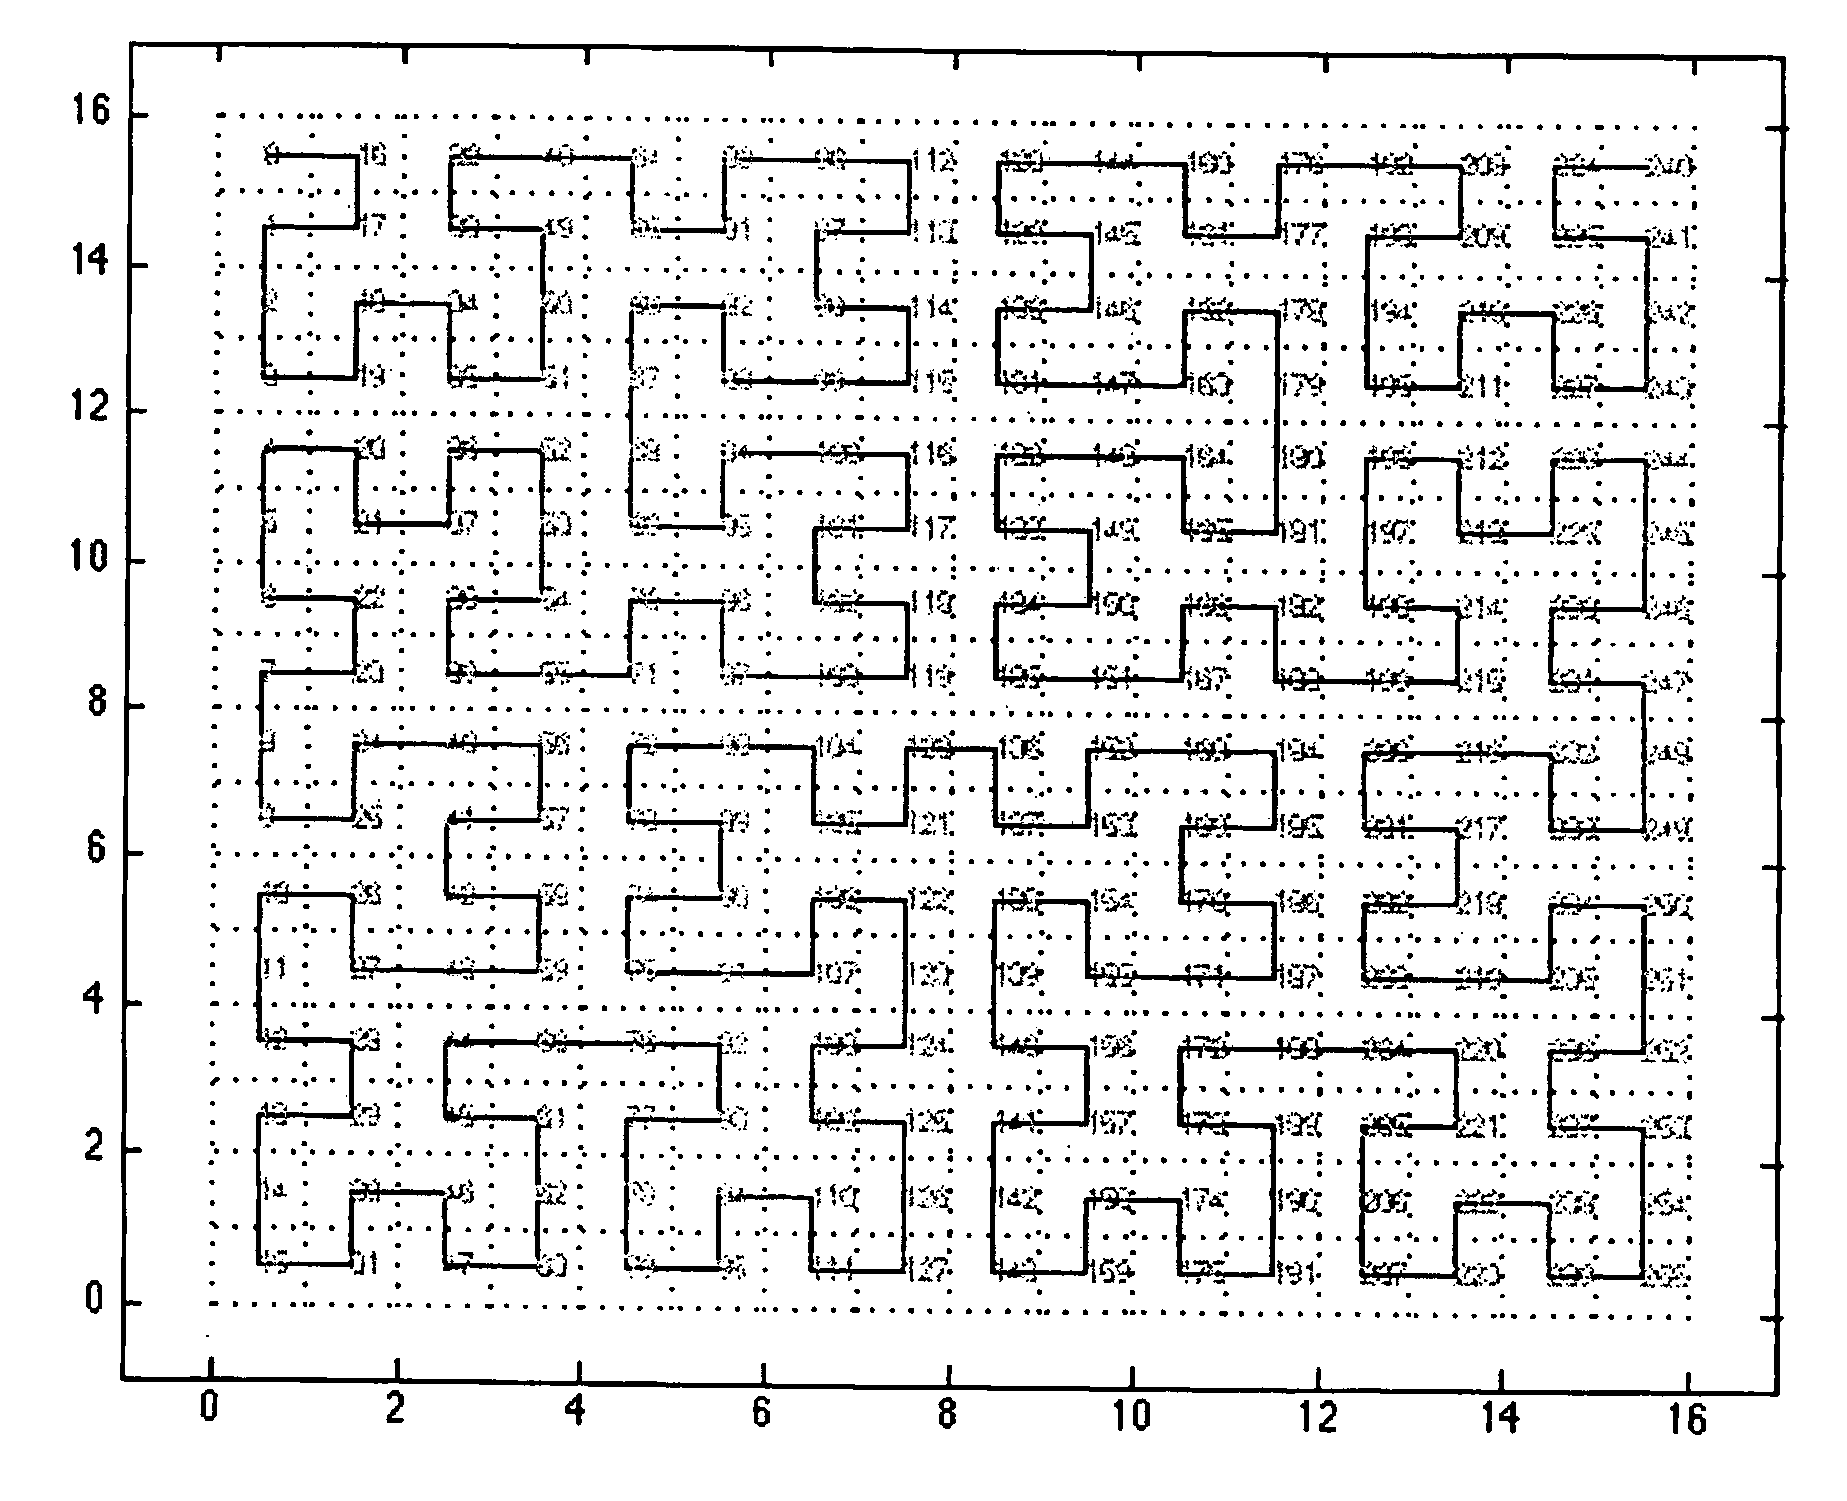 Method of providing space filling patterns